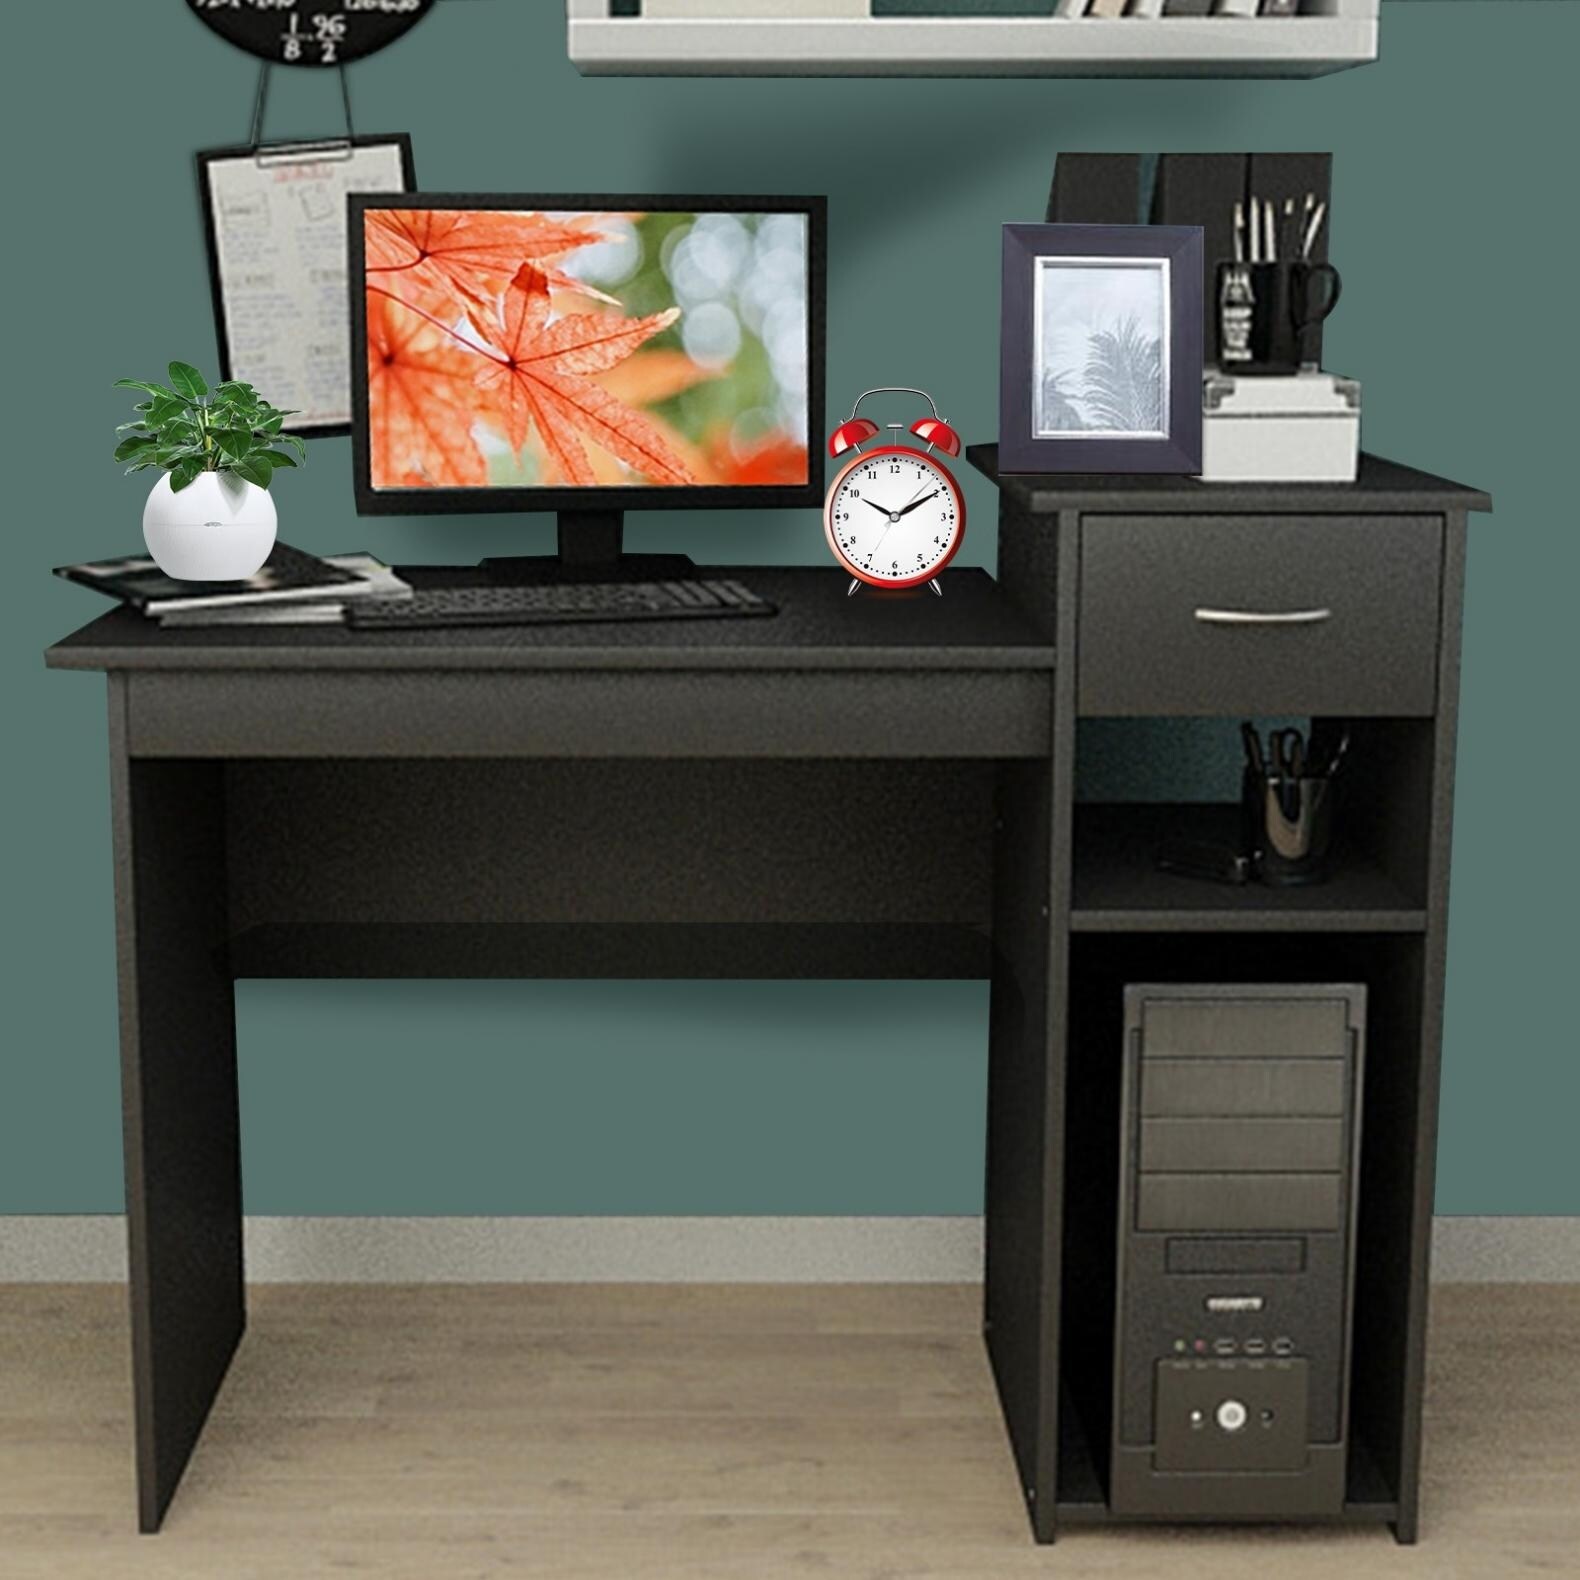 https://ak1.ostkcdn.com/images/products/is/images/direct/796c7862cbe4c31f33e0012e532bb4136342a099/Compact-Computer-Desk-With-Drawers-And-Shelves.jpg